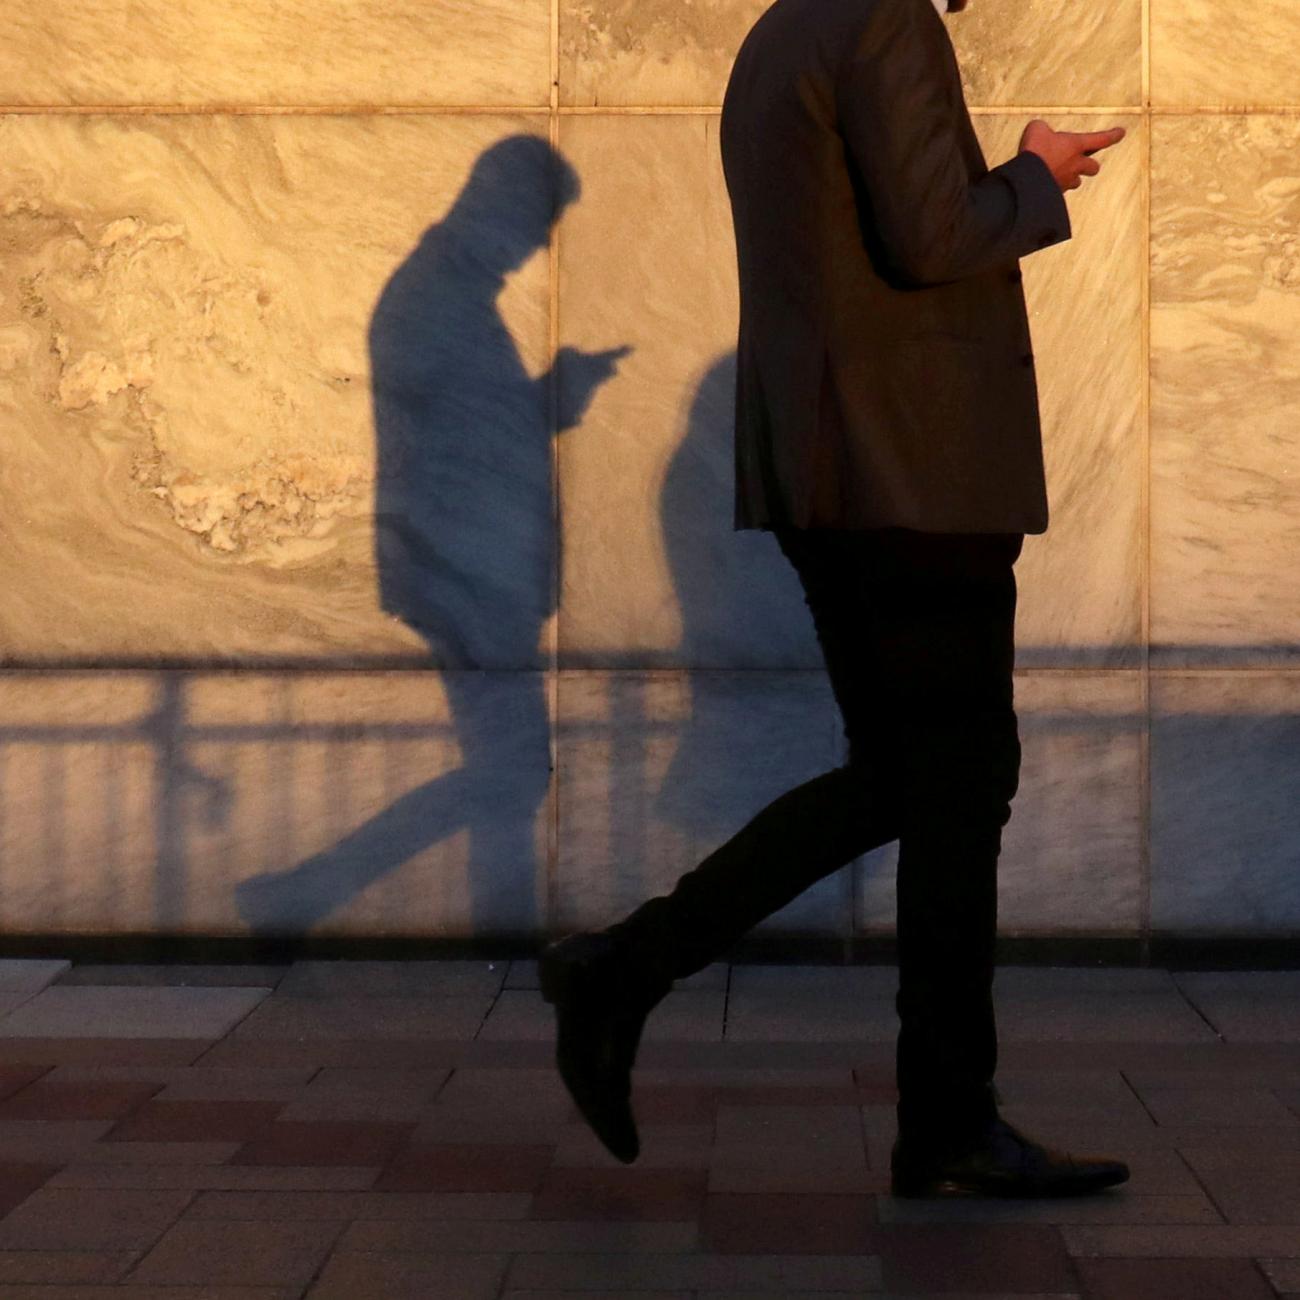 A man using a smart phone walks through London's Canary Wharf financial district in the warm yellow evening light, casting a shadow in London, United Kingdom, on September 28, 2018.